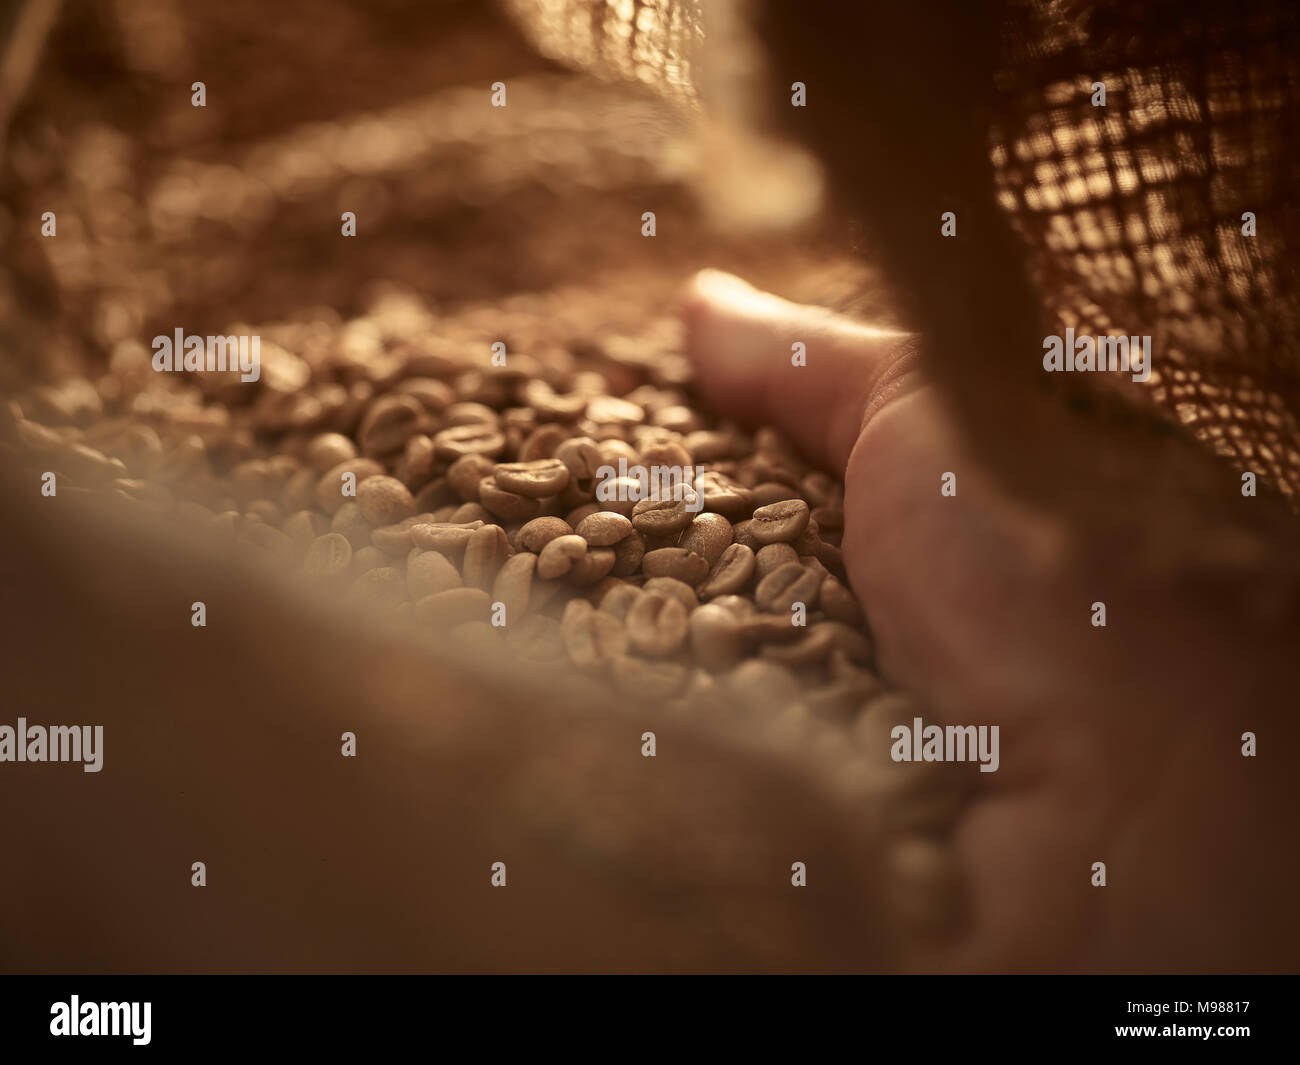 Man's hand checking green coffee in gunny bag, close-up Stock Photo